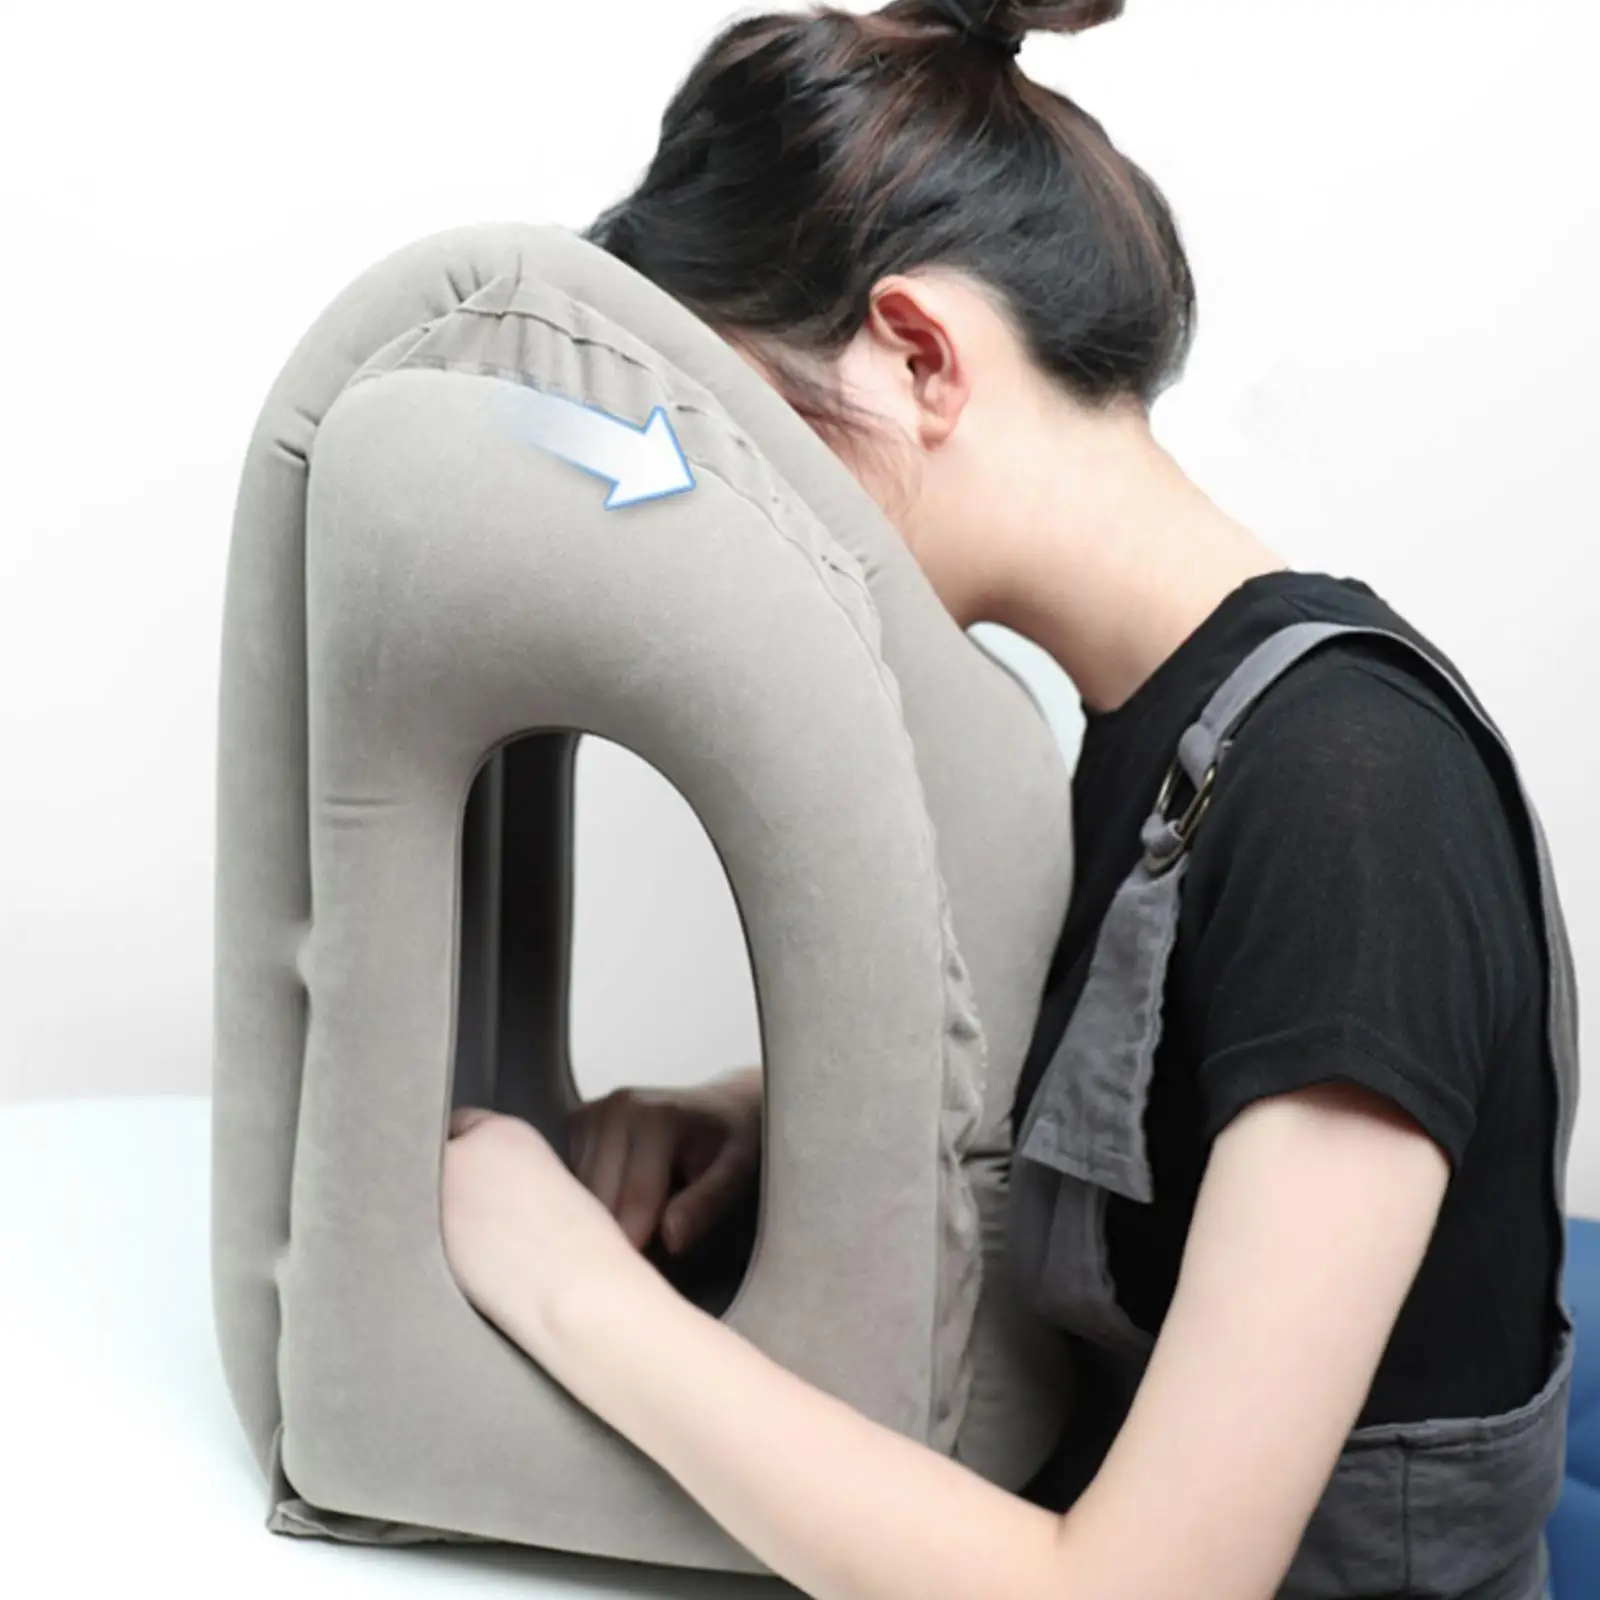 

Upgraded Inflatable Air Cushion Travel Pillow Headrest Chin Support Cushions For Airplane Plane Car Office Rest Neck Nap Pillows